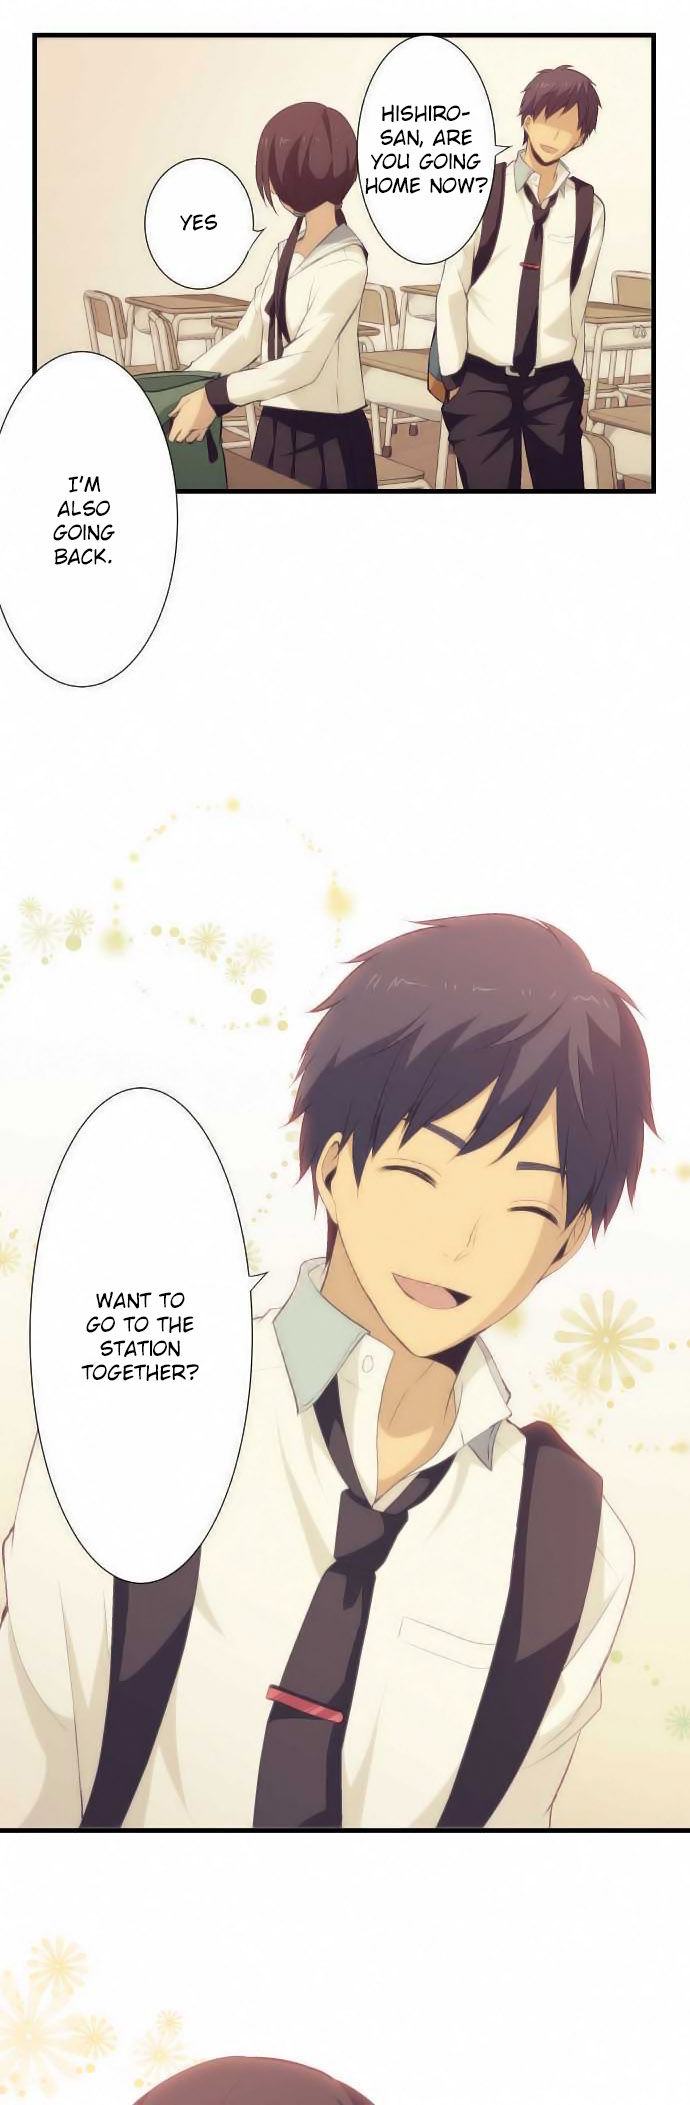 ReLIFE 59